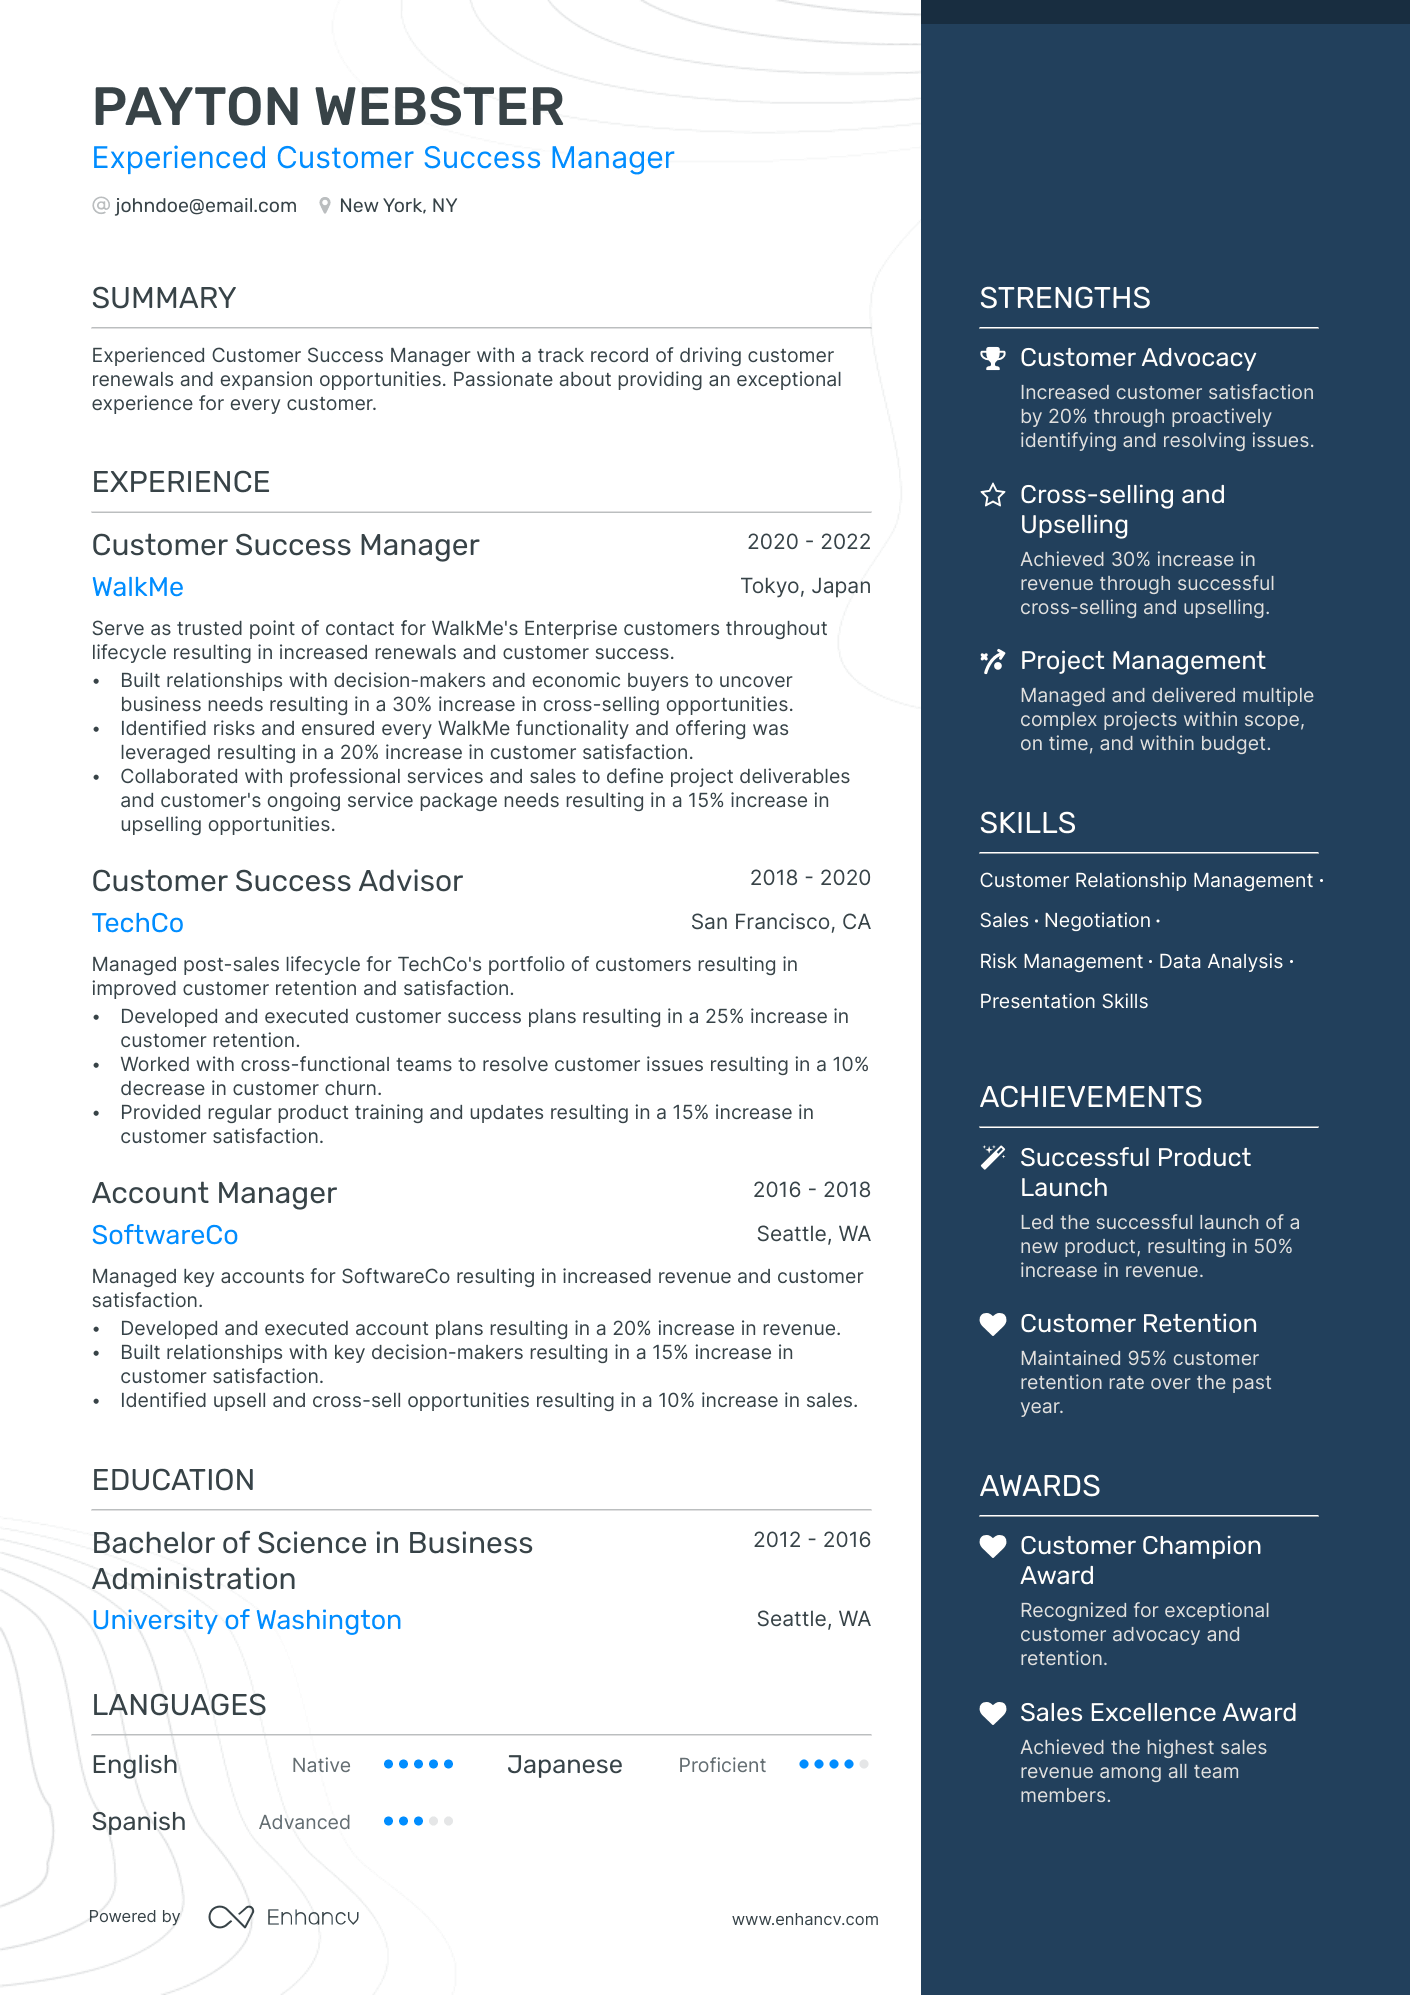 Customer Service Manager resume example